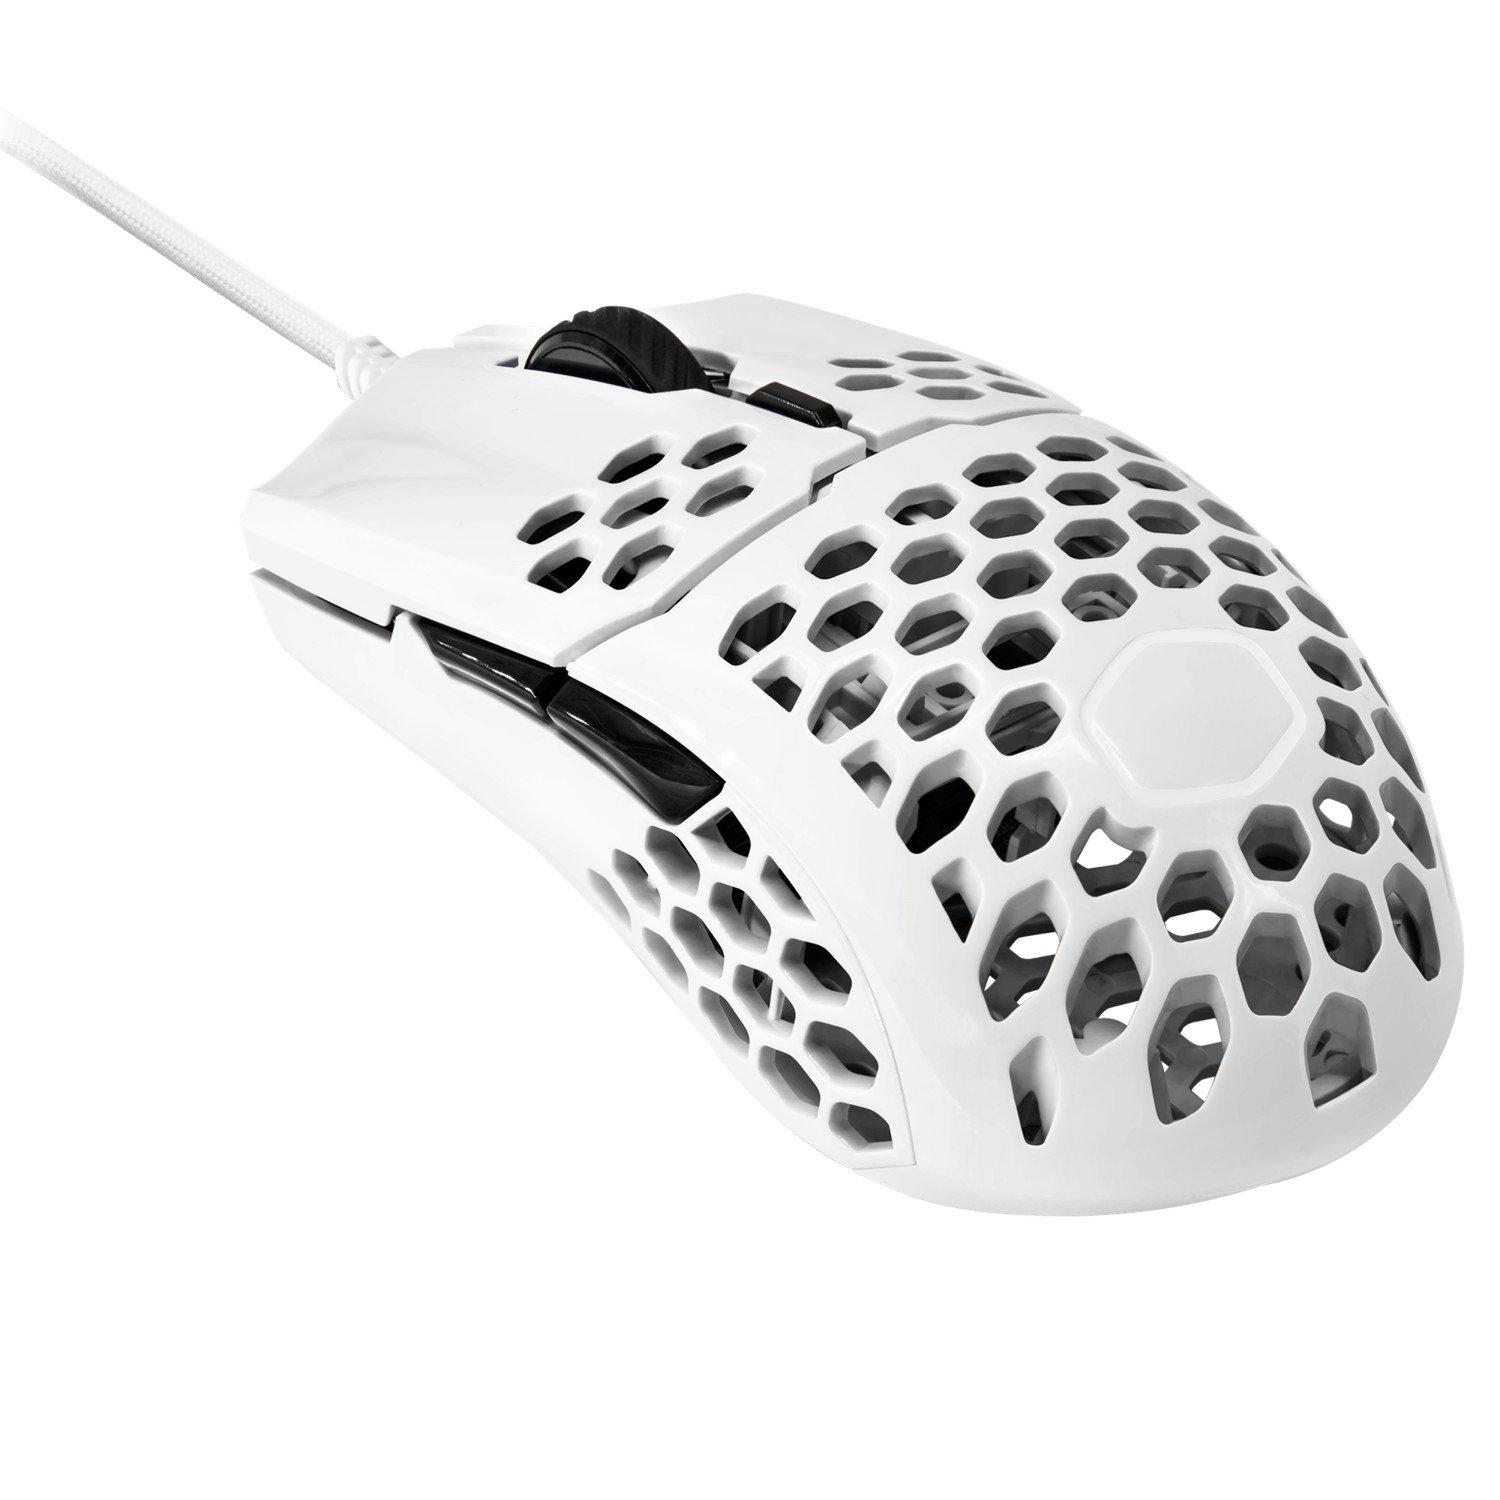 list item 1 of 6 Cooler Master MM710 Gaming Mouse